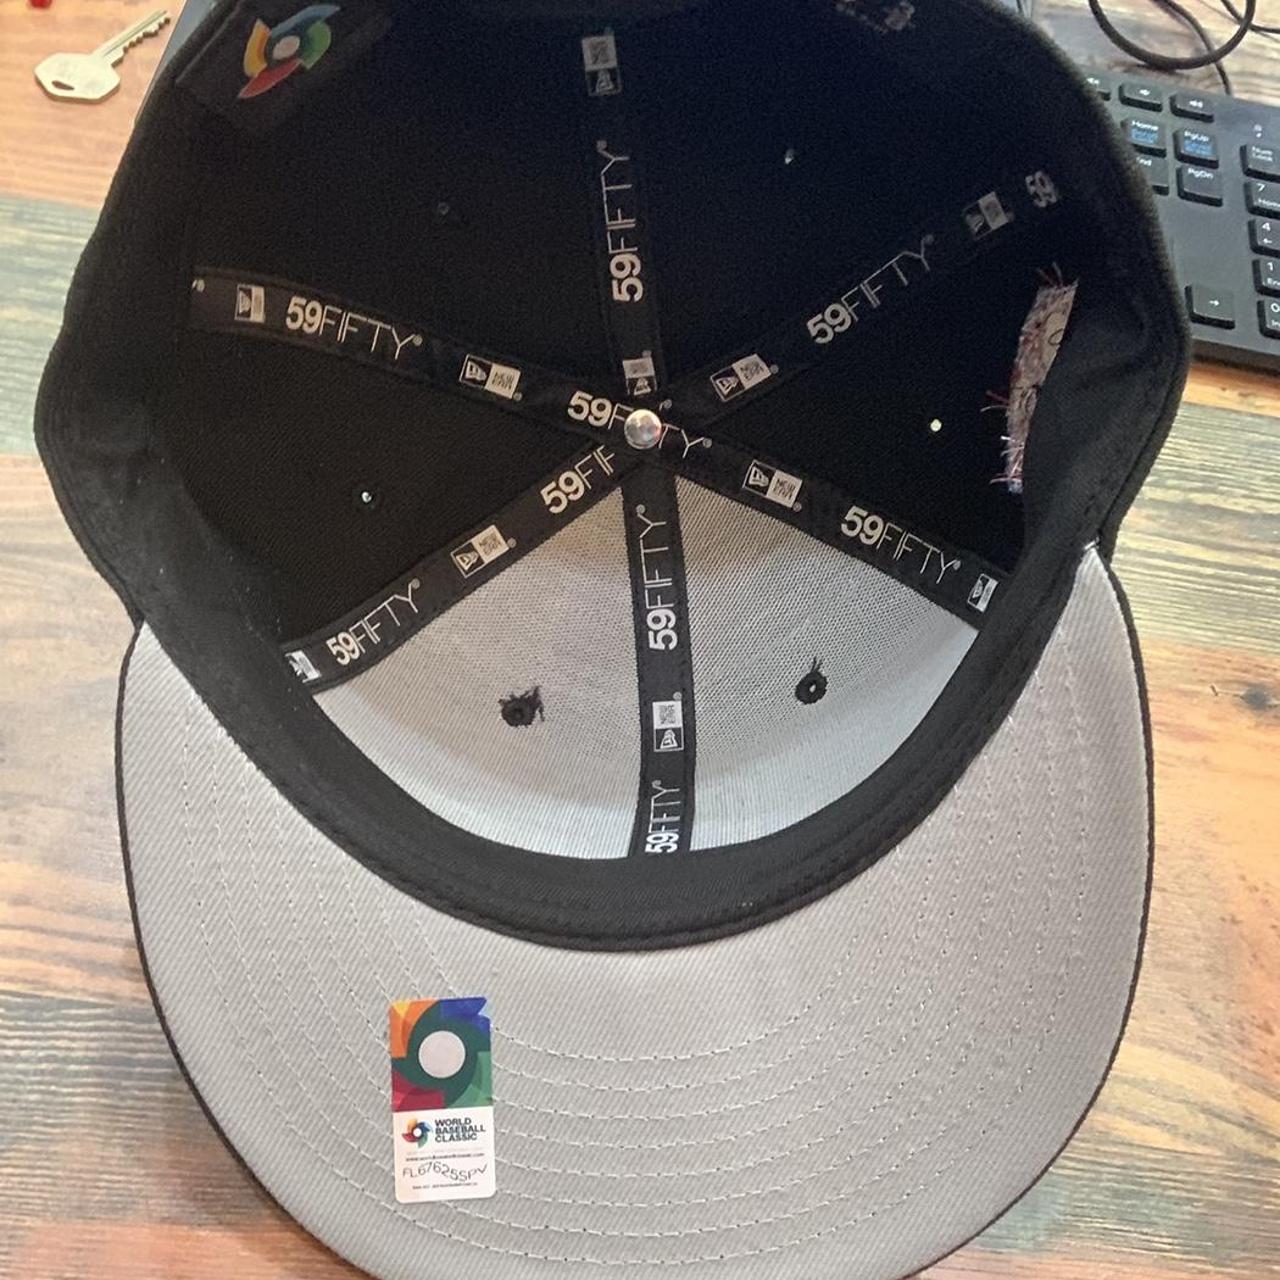 Custom Black and White Team Mexico fitted 7... - Depop